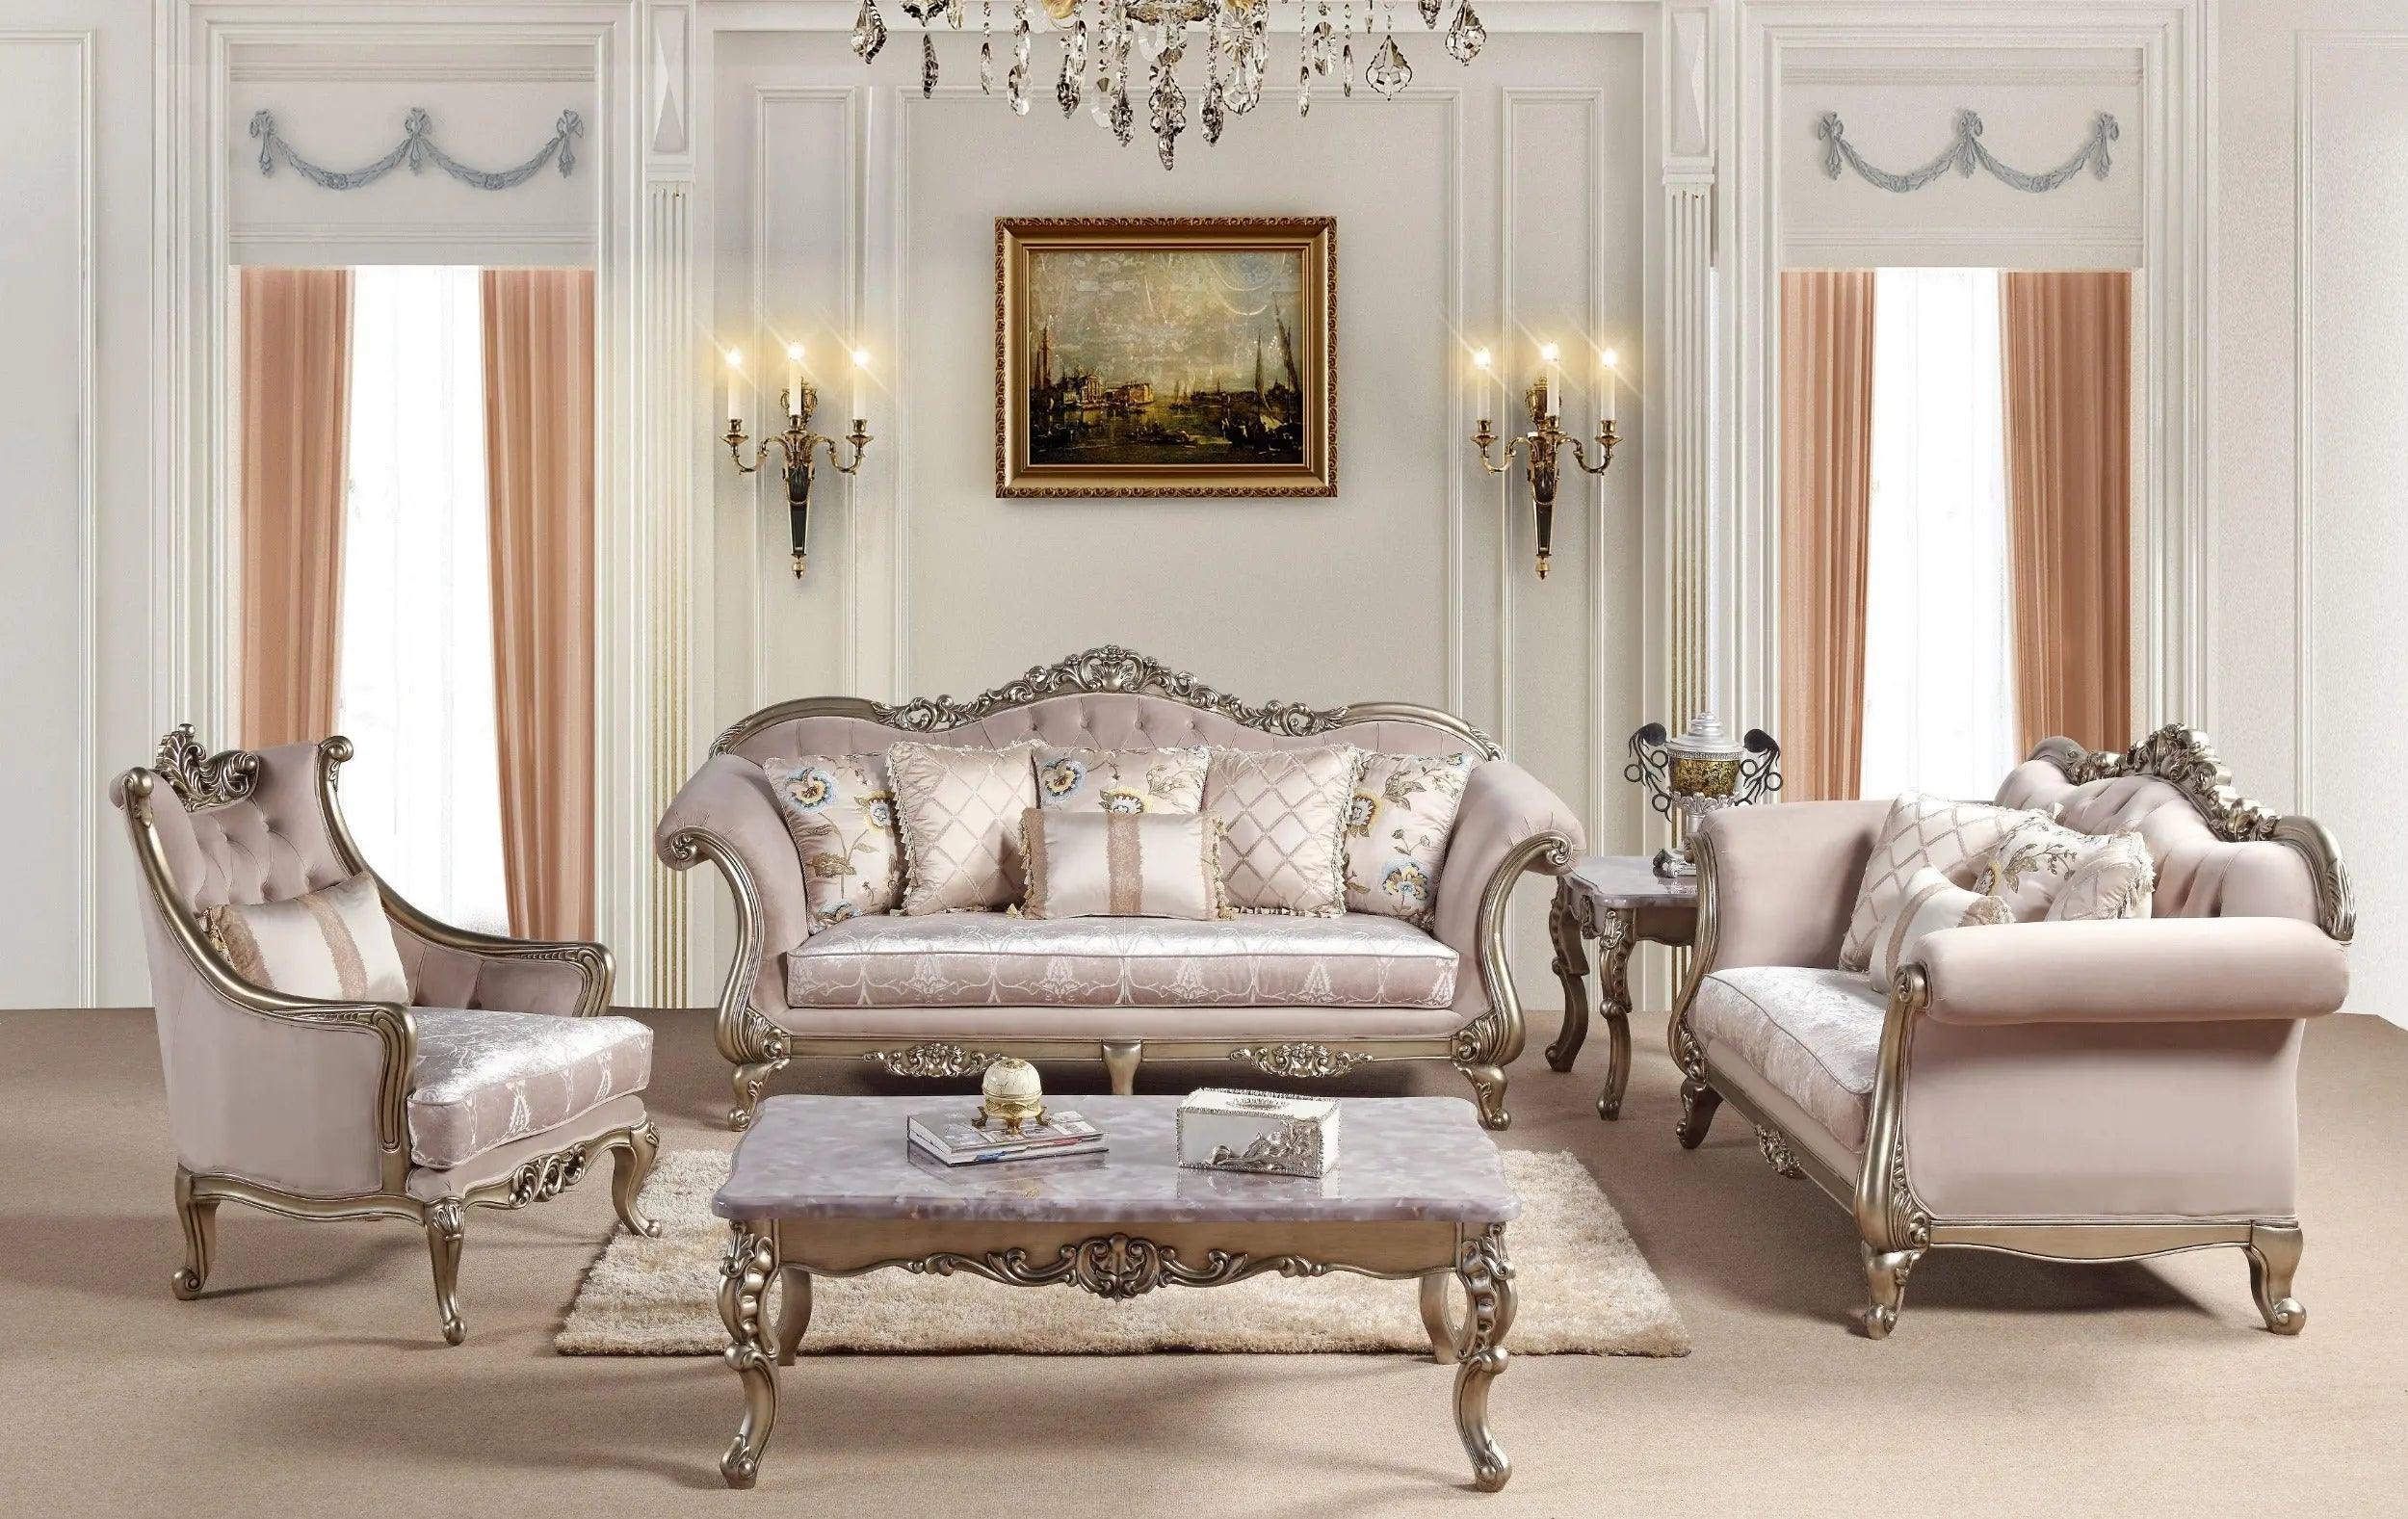 Ariana Traditional Sofa and Loveseat in Champagne Wood Finish by Cosmos Furniture Cosmos Furniture